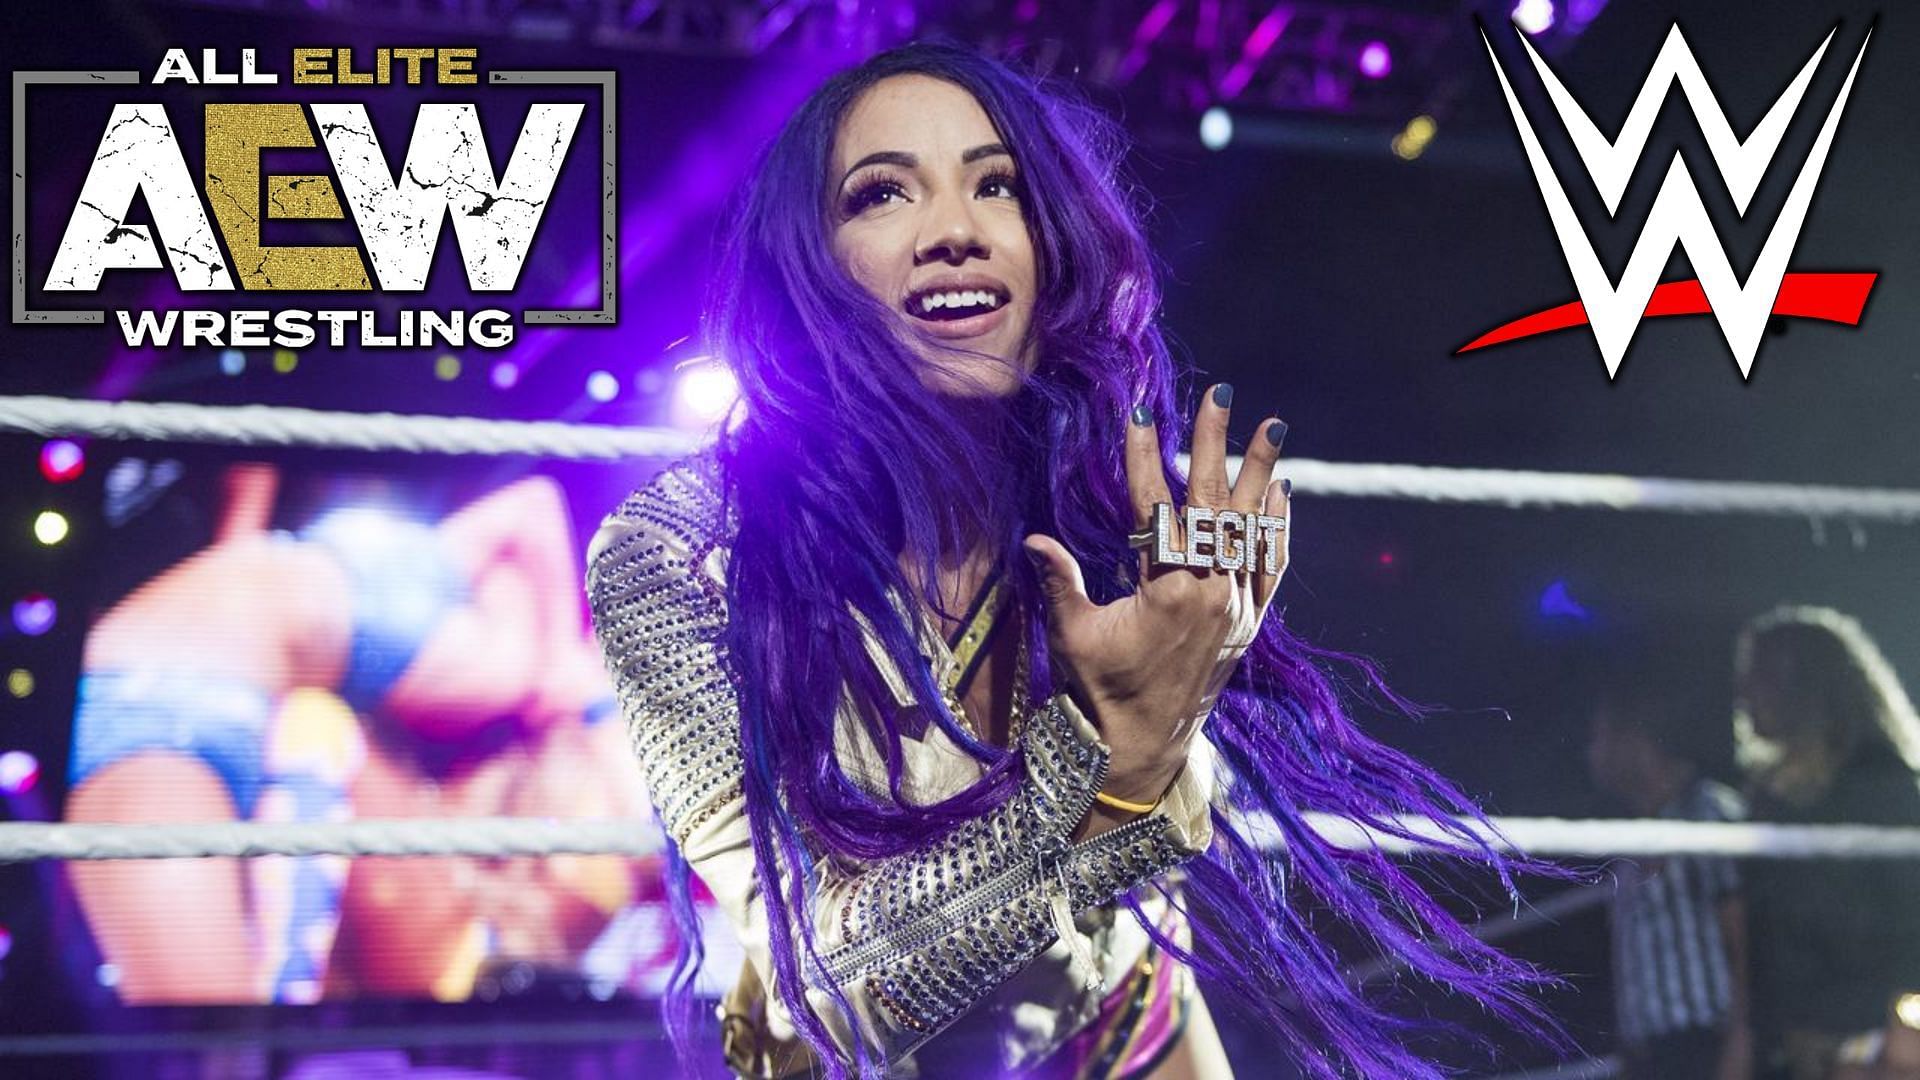 Sasha Banks will reunite with a number of stars at a major upcoming event.